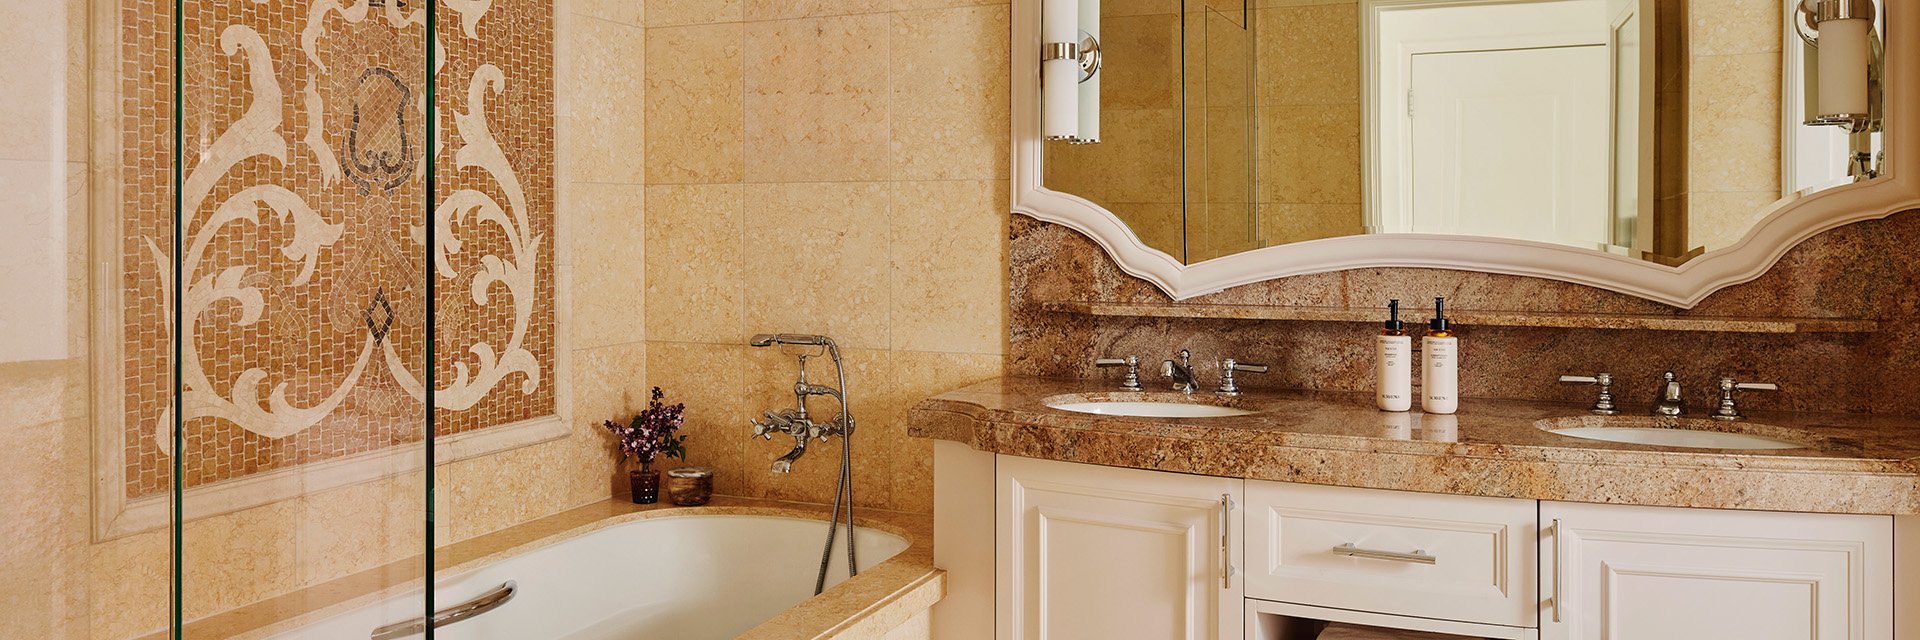 A tiled bathroom, a bathtub with a tiled wall mosaic, and a brown marble sink with white drawers.